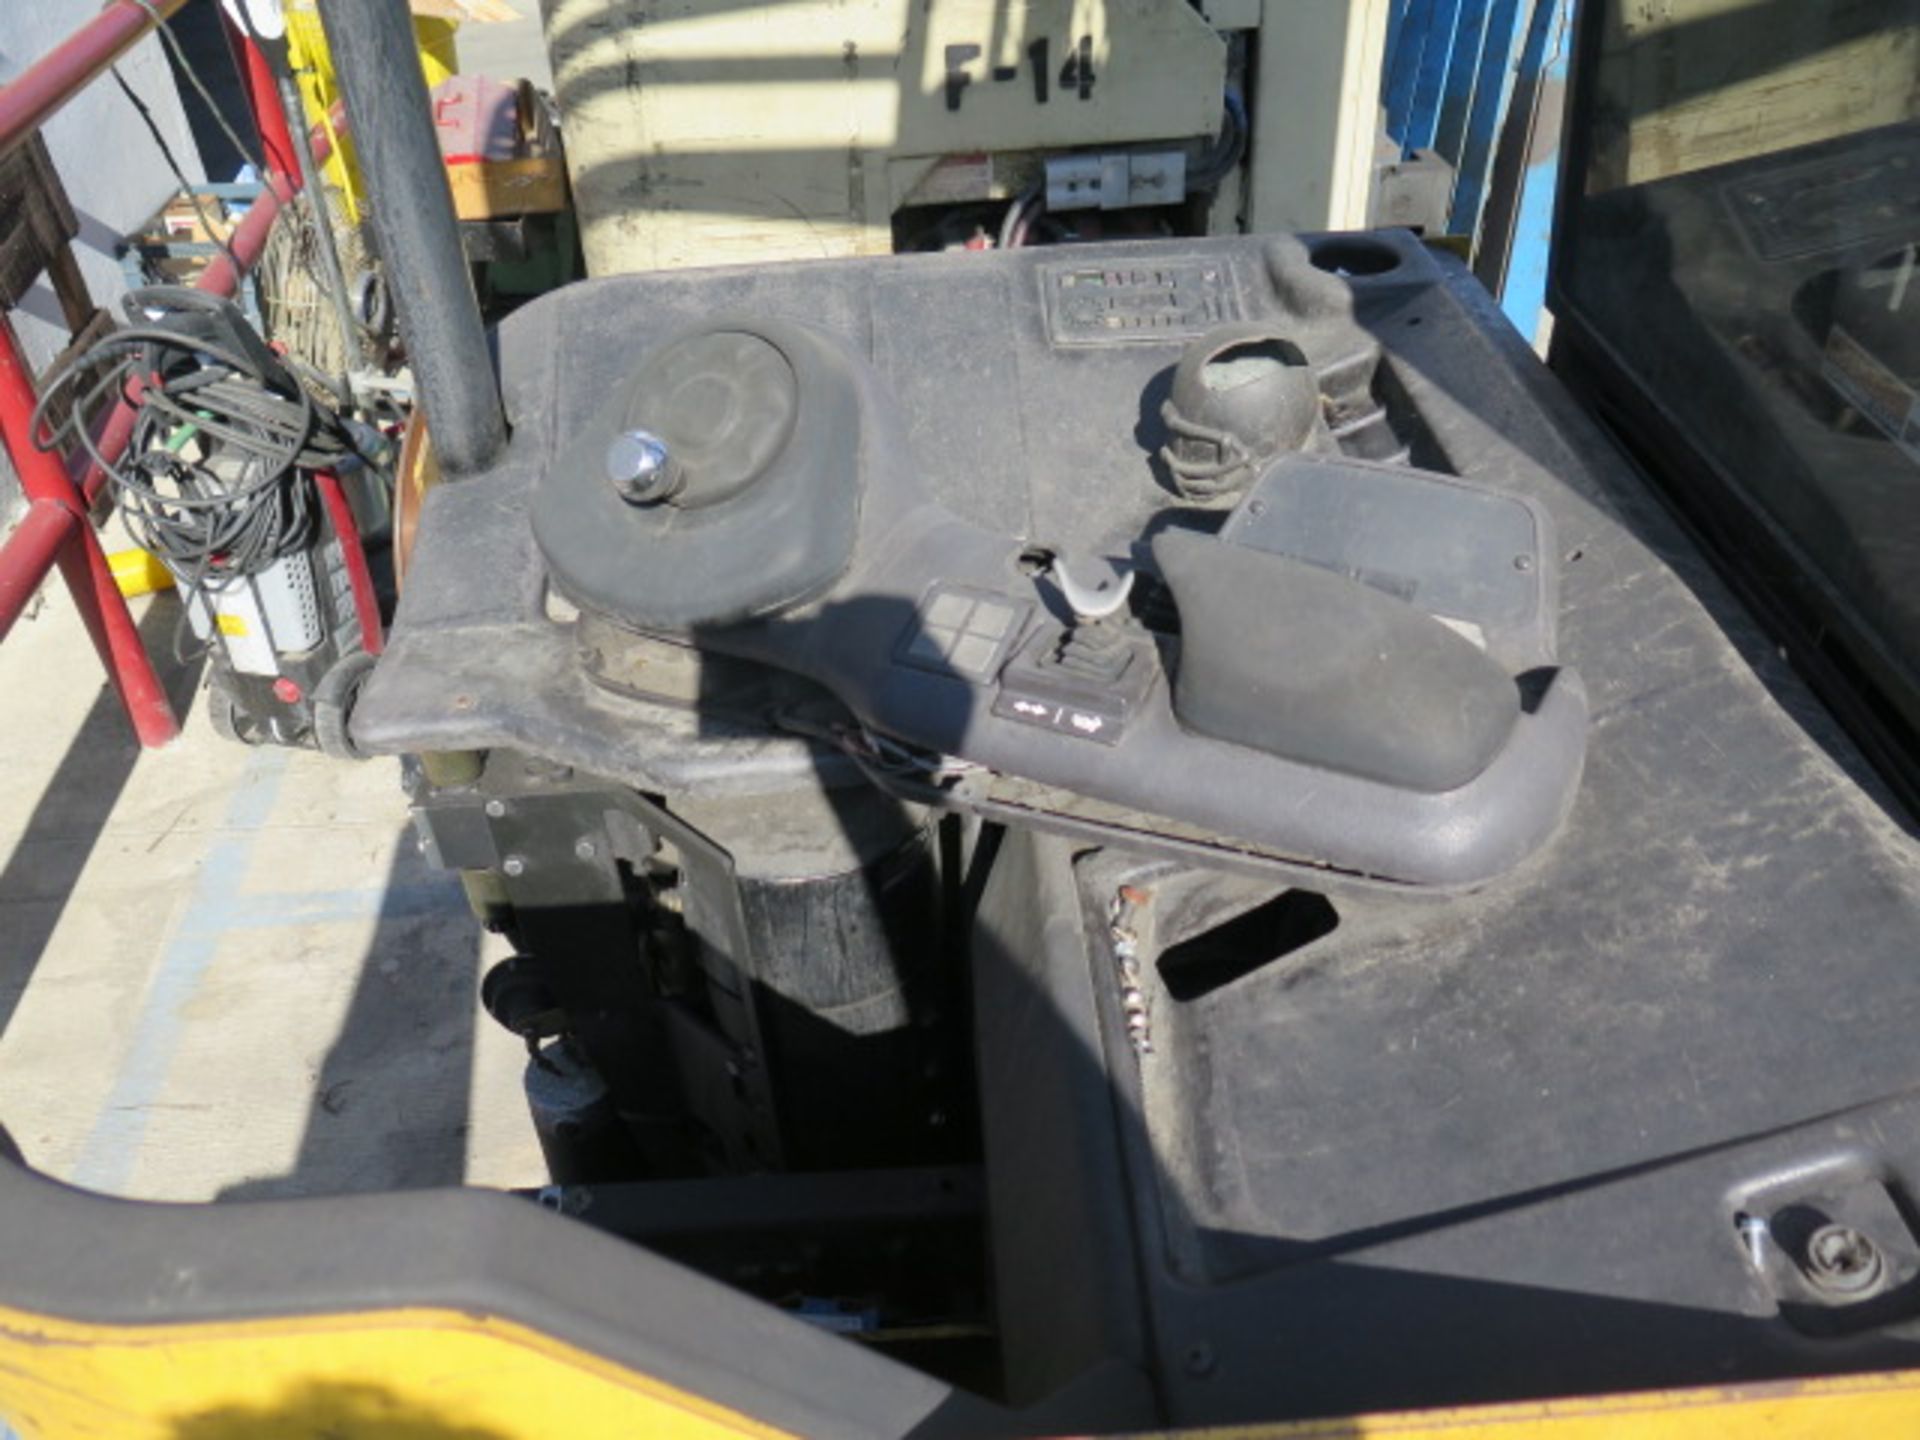 Komatsu Stand-In Electric Forklift (NEEDS WORK) (SOLD AS-IS - NO WARRANTY) - Image 7 of 9